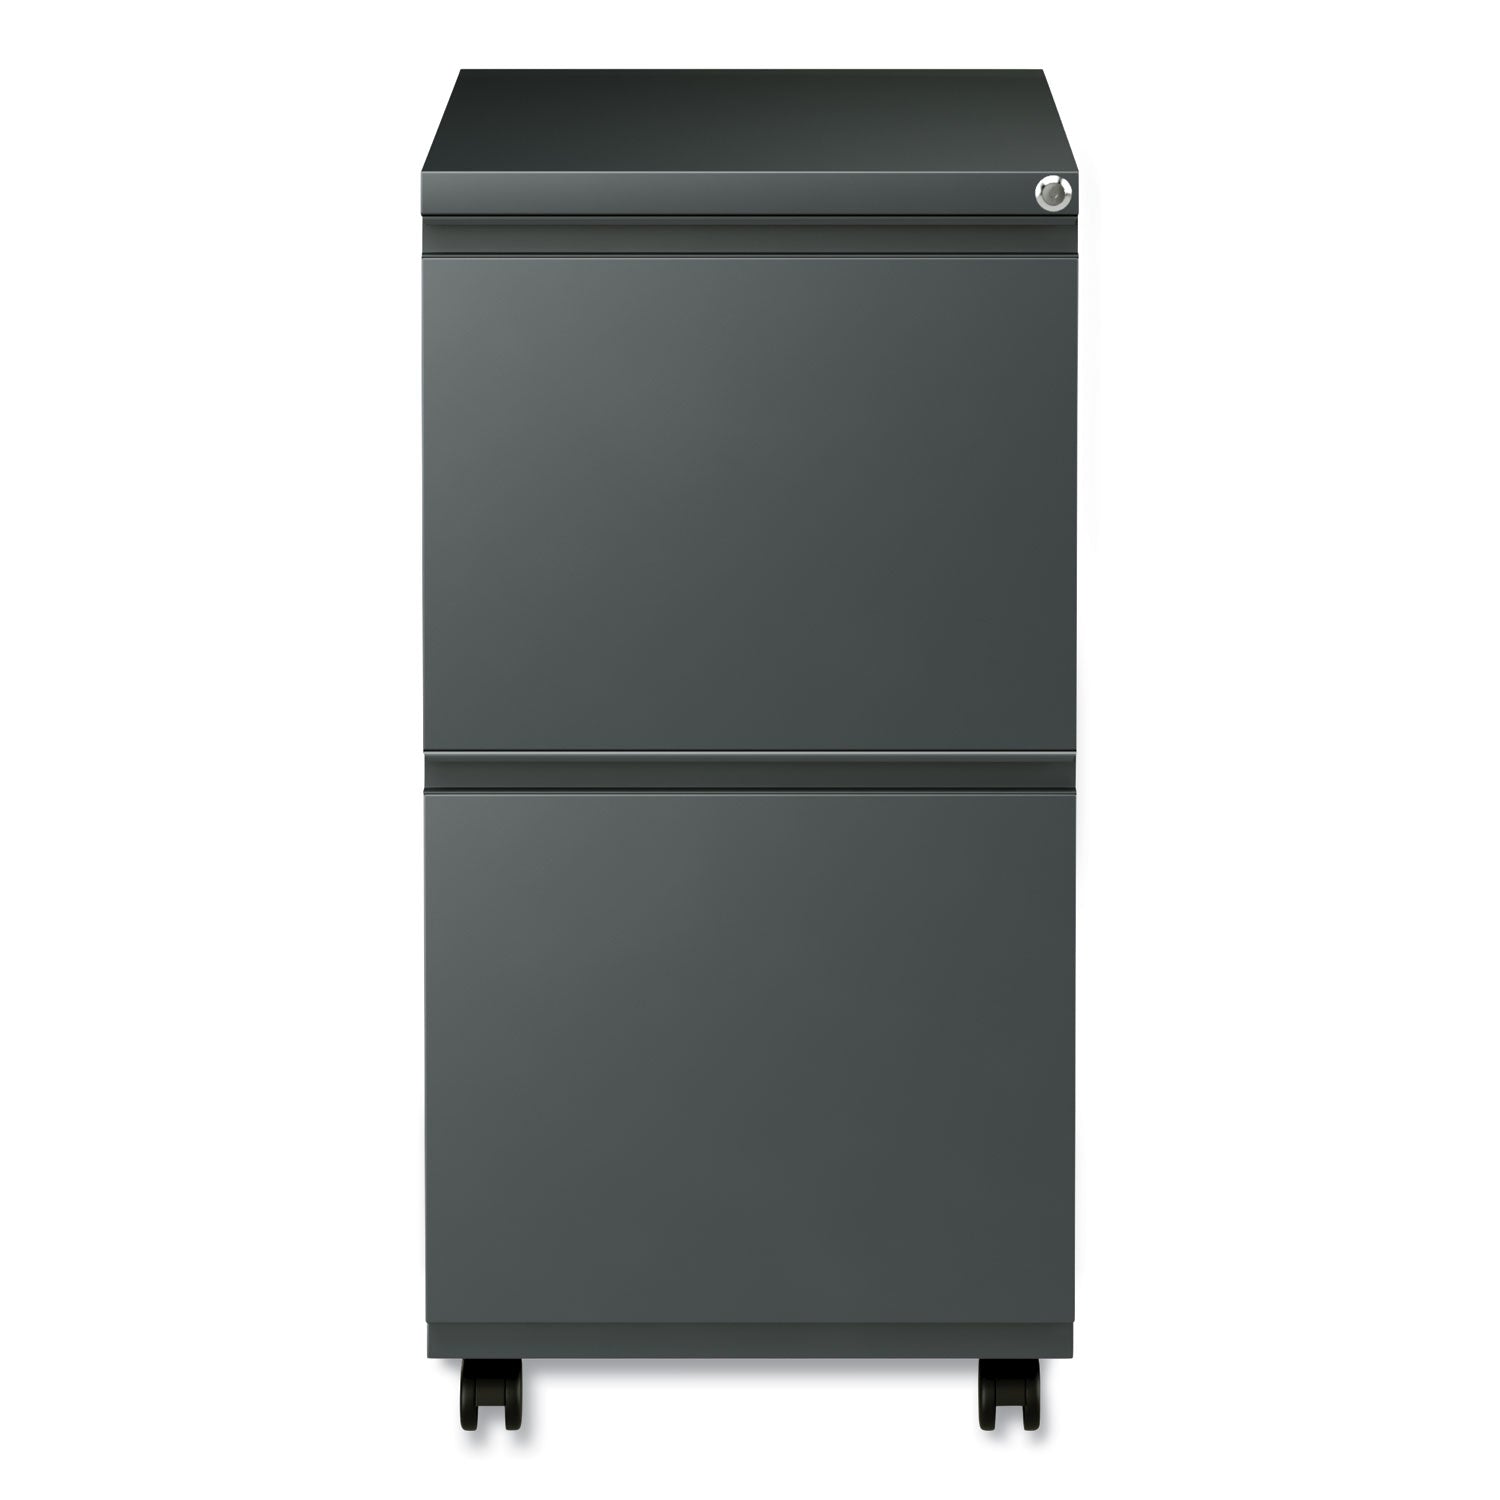 file-pedestal-with-full-length-pull-left-or-right-2-legal-letter-size-file-drawers-charcoal-1496-x-1929-x-2775_alepbffch - 5